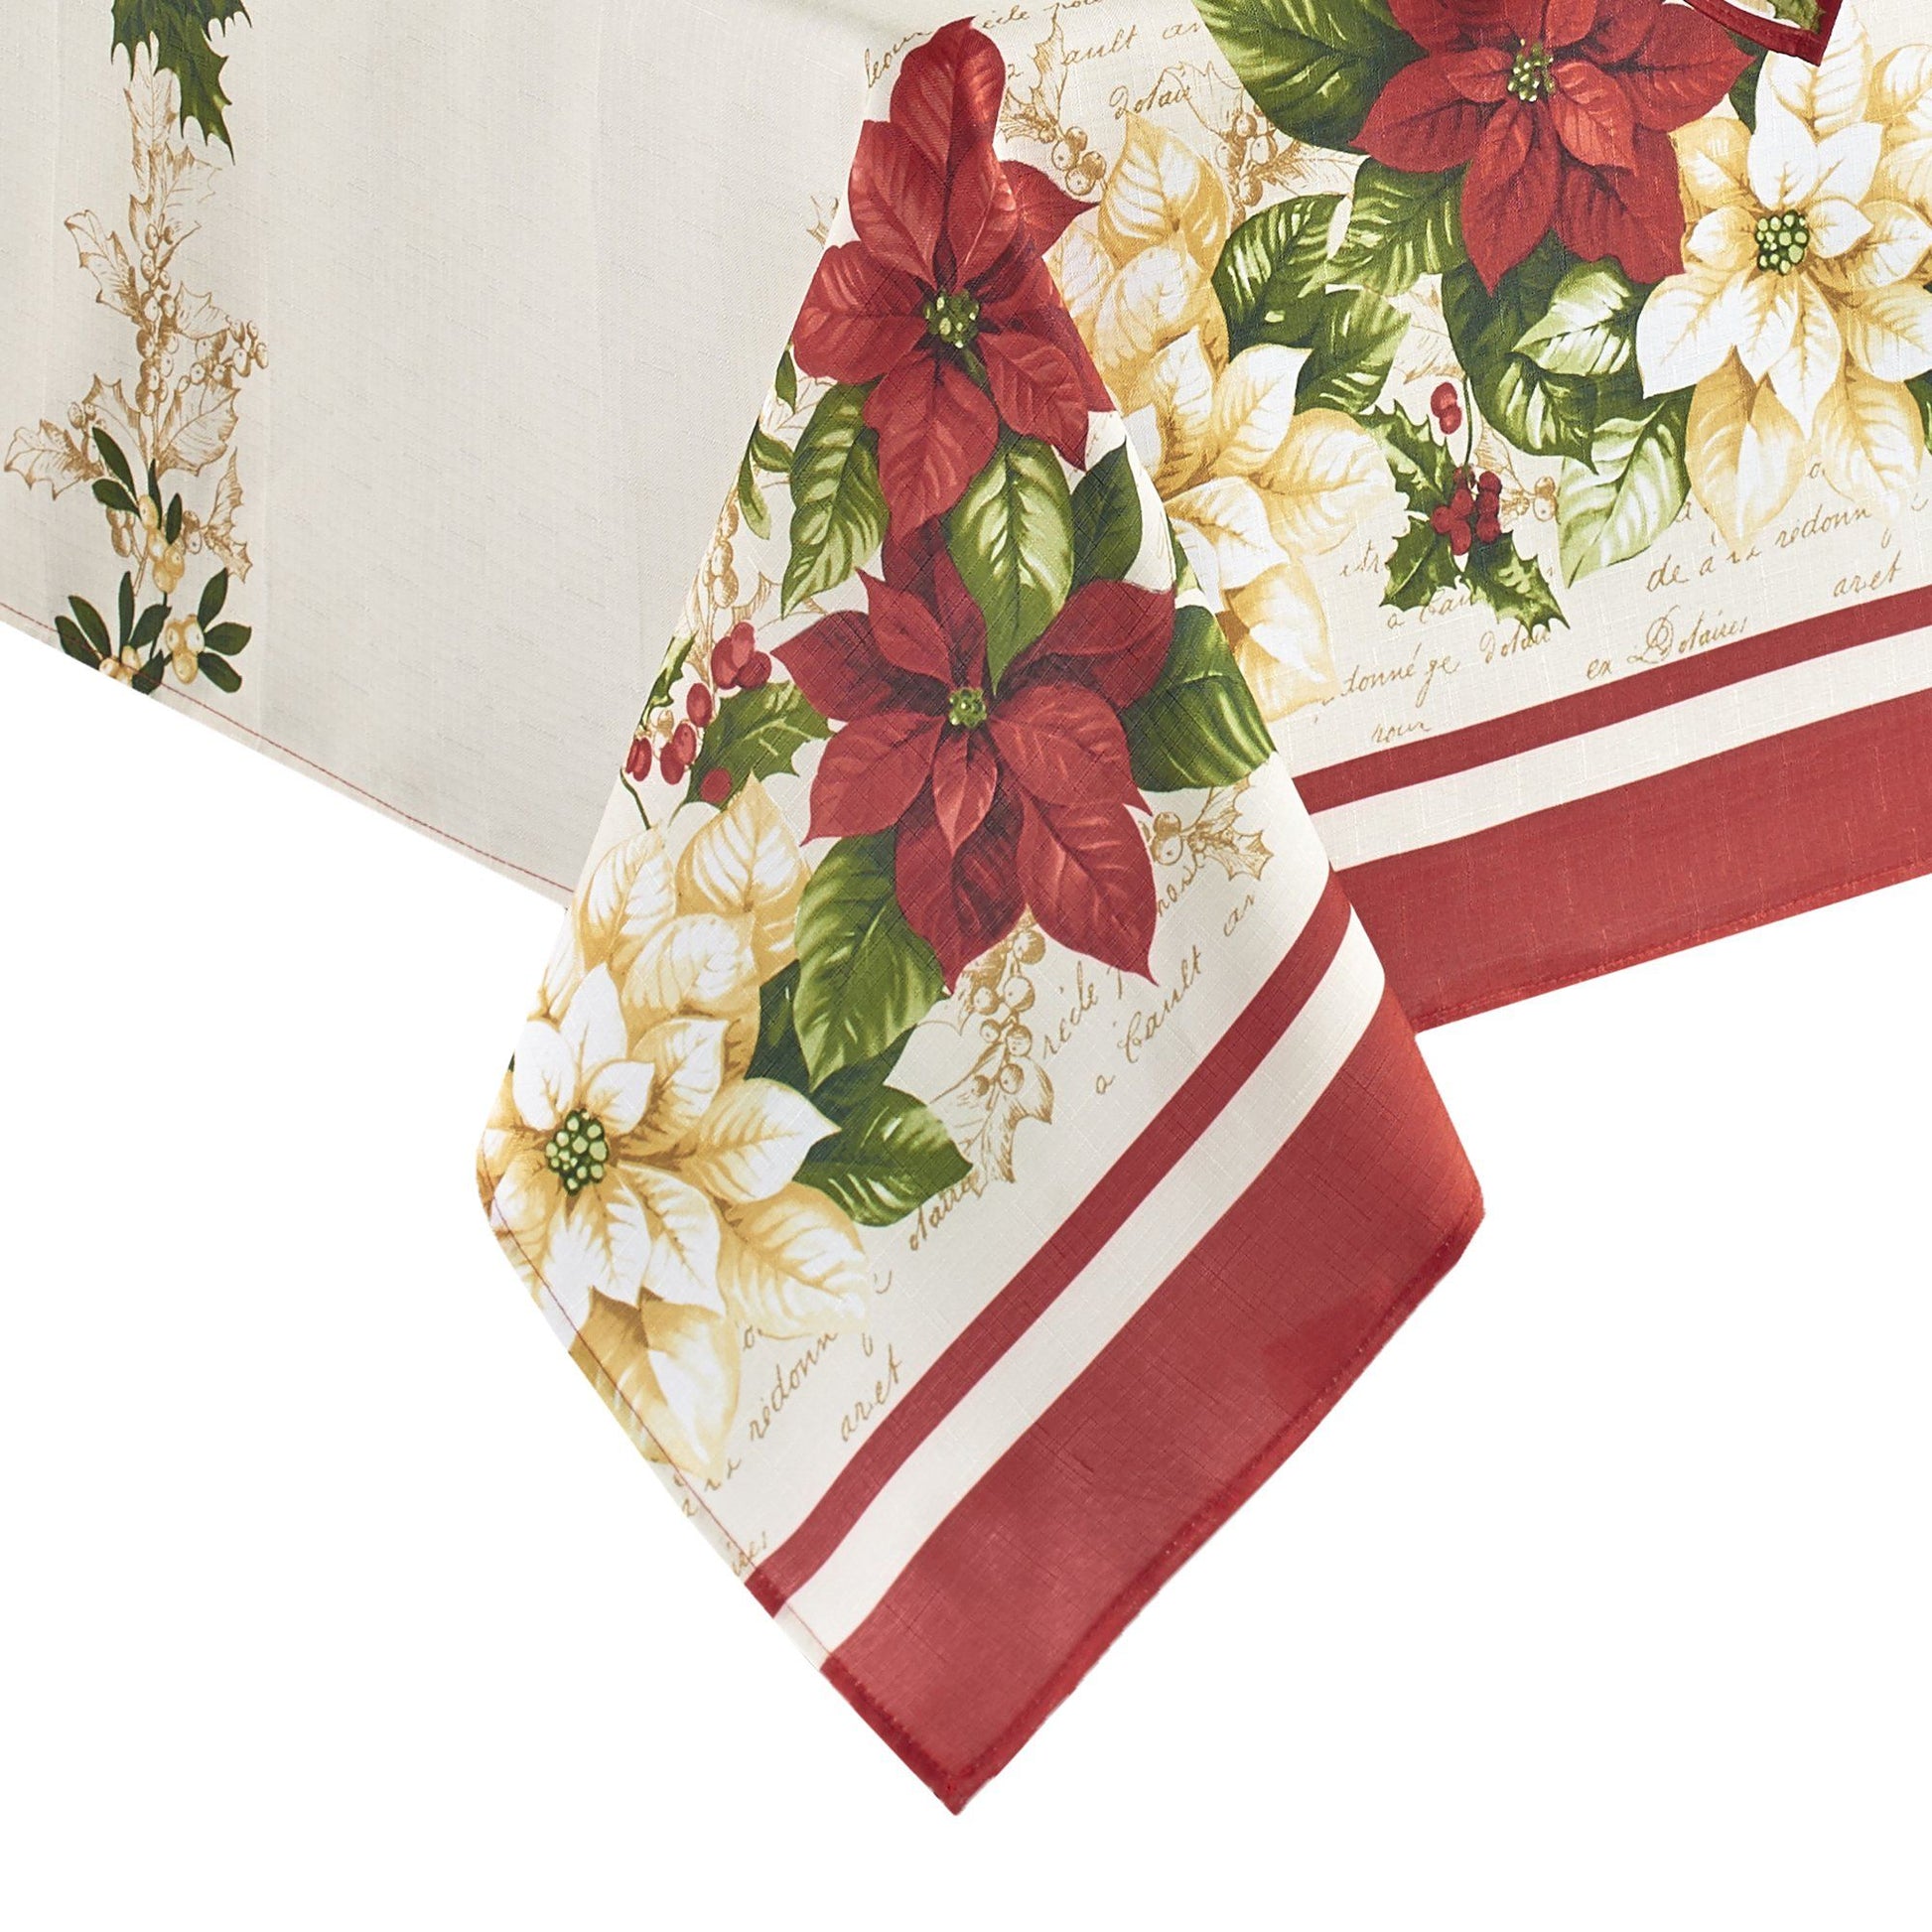 Red and White Poinsettias Tablecloth